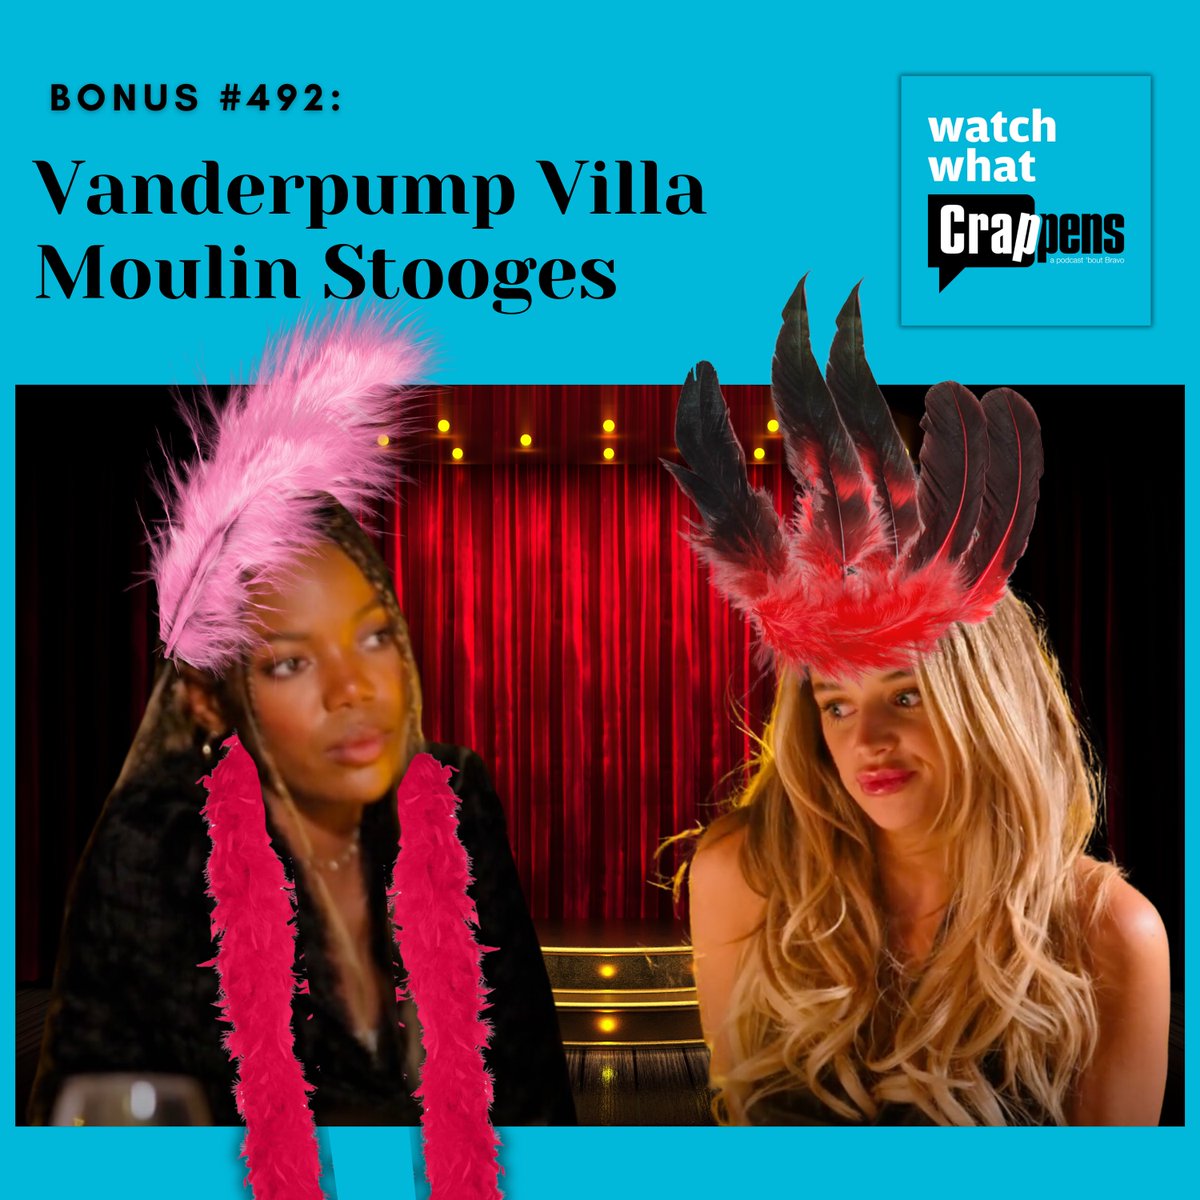 New Bonus Epi! #VanderpumpVilla dedicates a Moulin Rouge-themed episode to the mean girls, and if you don’t like it, you’re ugly! Meanwhile, the young maids get saucy, Eric falls down drunk (again), and Marciano does nothing to fix his eyebrows. Find this bonus episode on Patreon